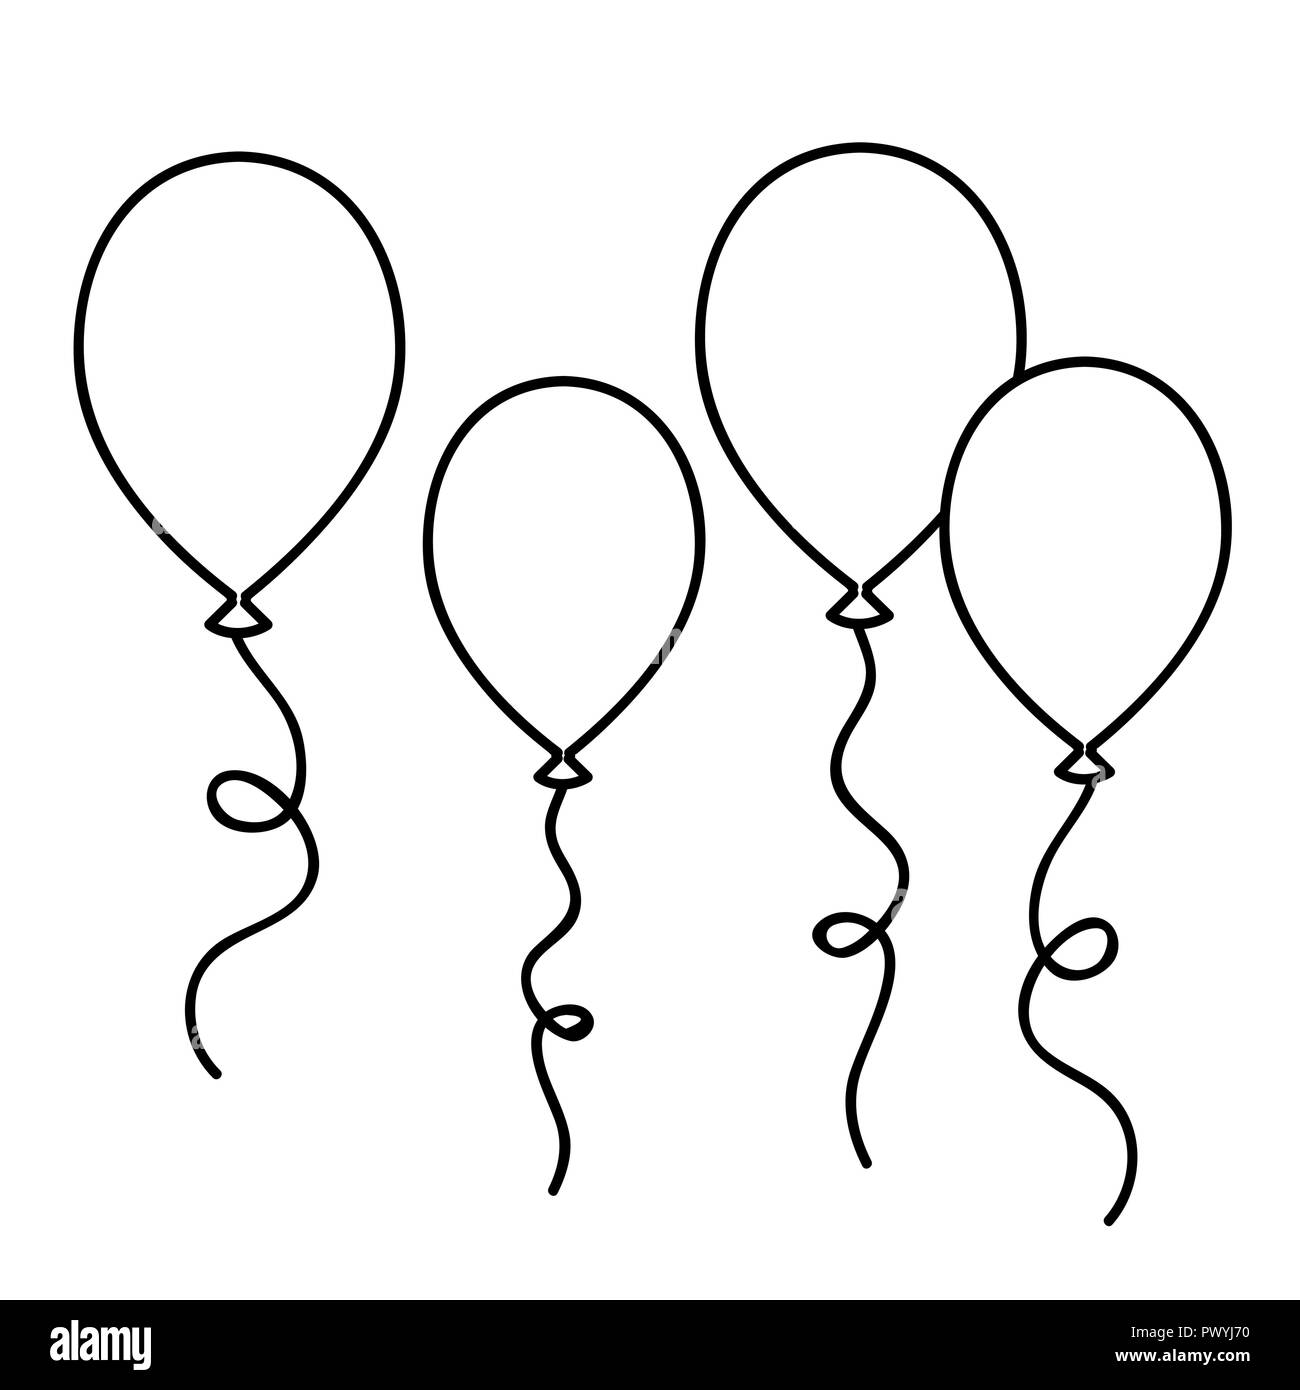 balloons simple drawing outline for coloring book vector illustration Stock Vector